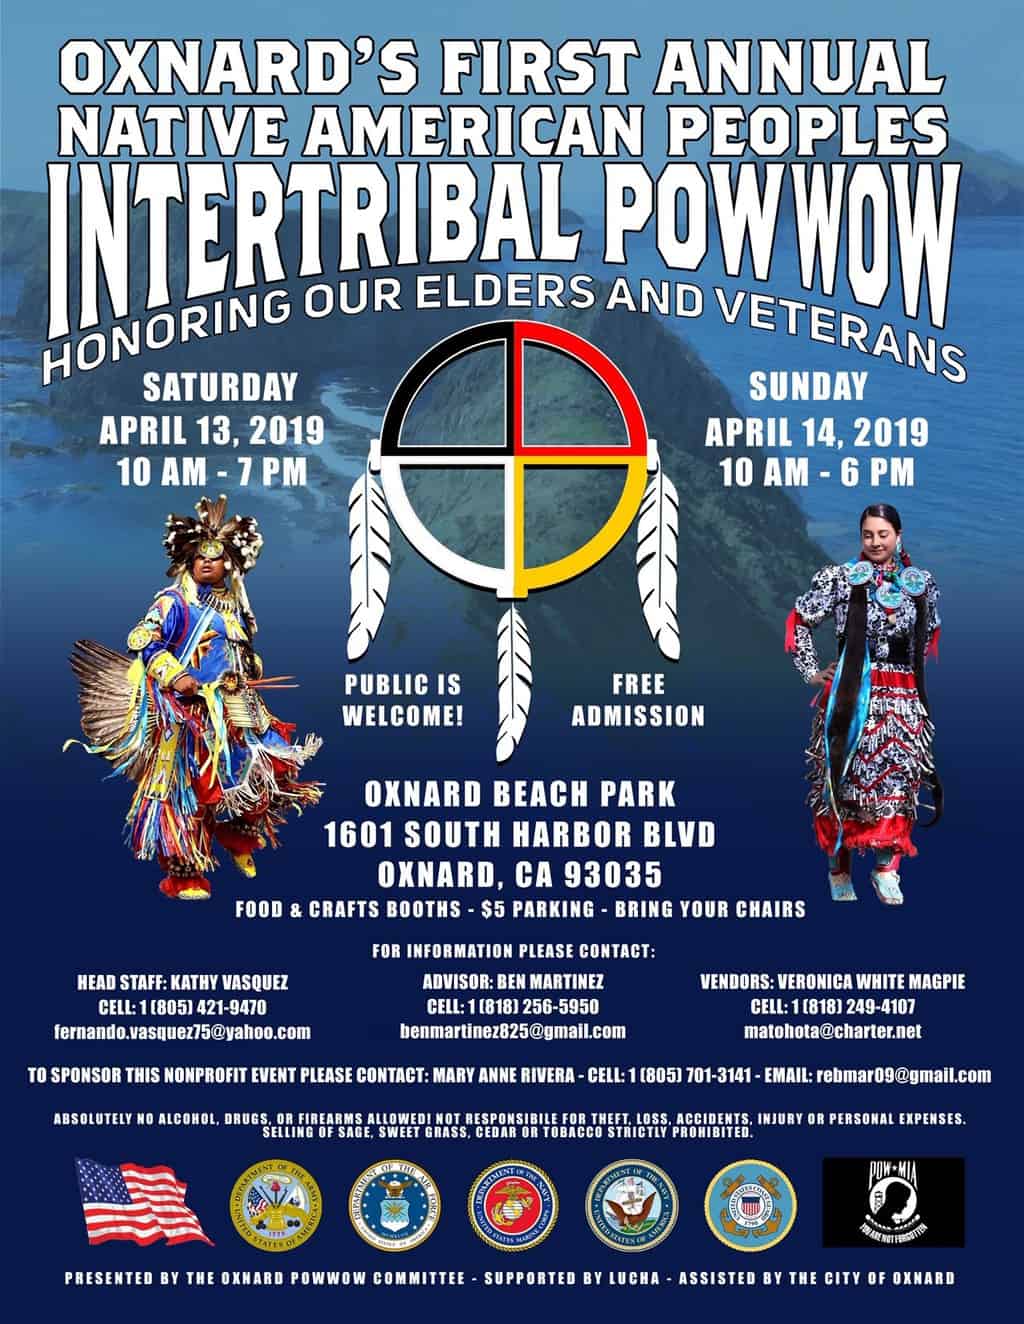 The Native American Peoples Intertribal Pow Wow "Honoring our Elders and Veterans" (2019)